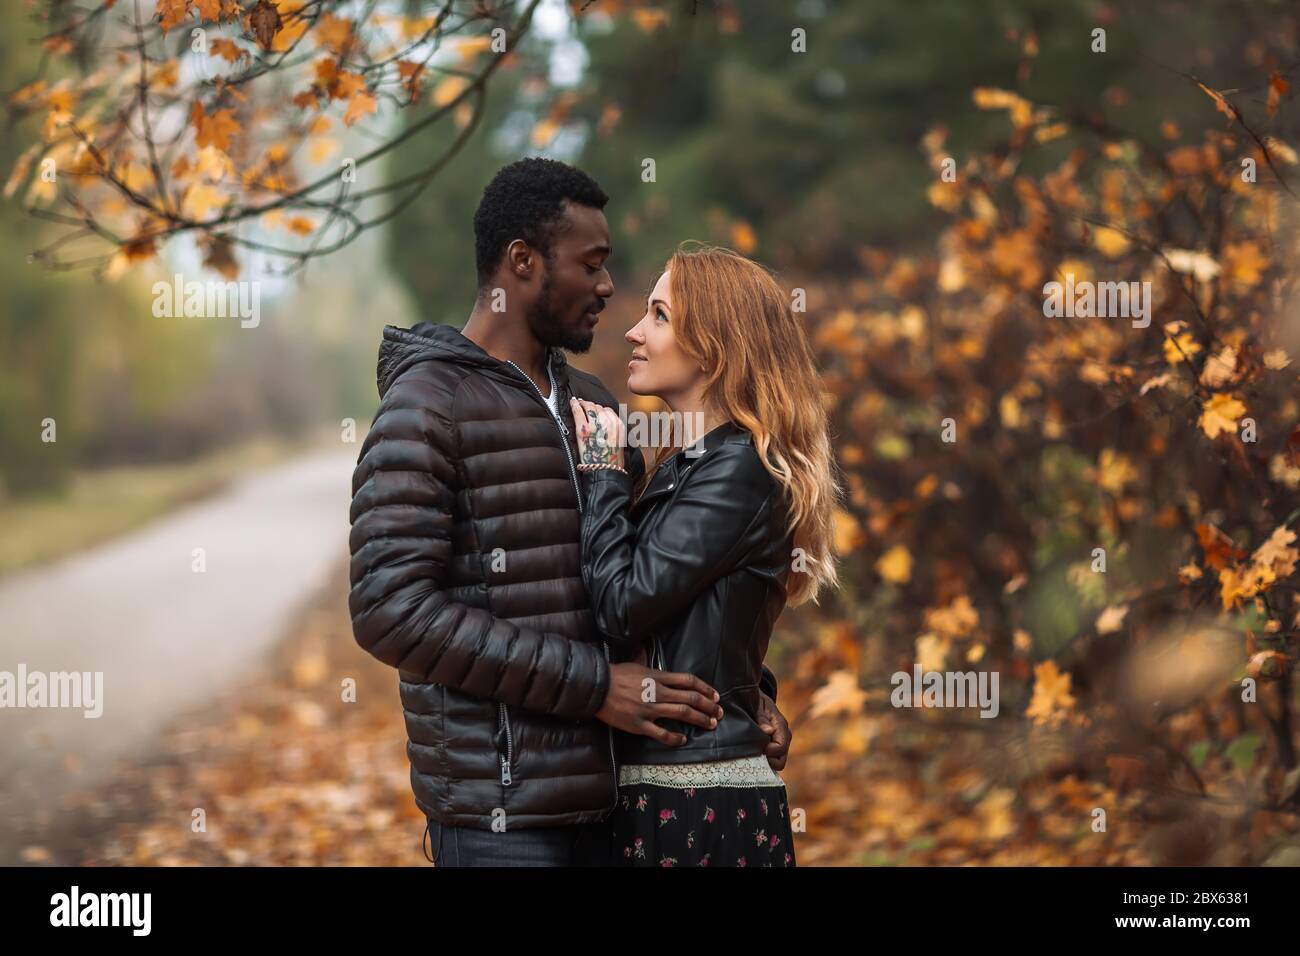 Happy Cute Interracial Couple Posing In Blurry Autumn Park Background